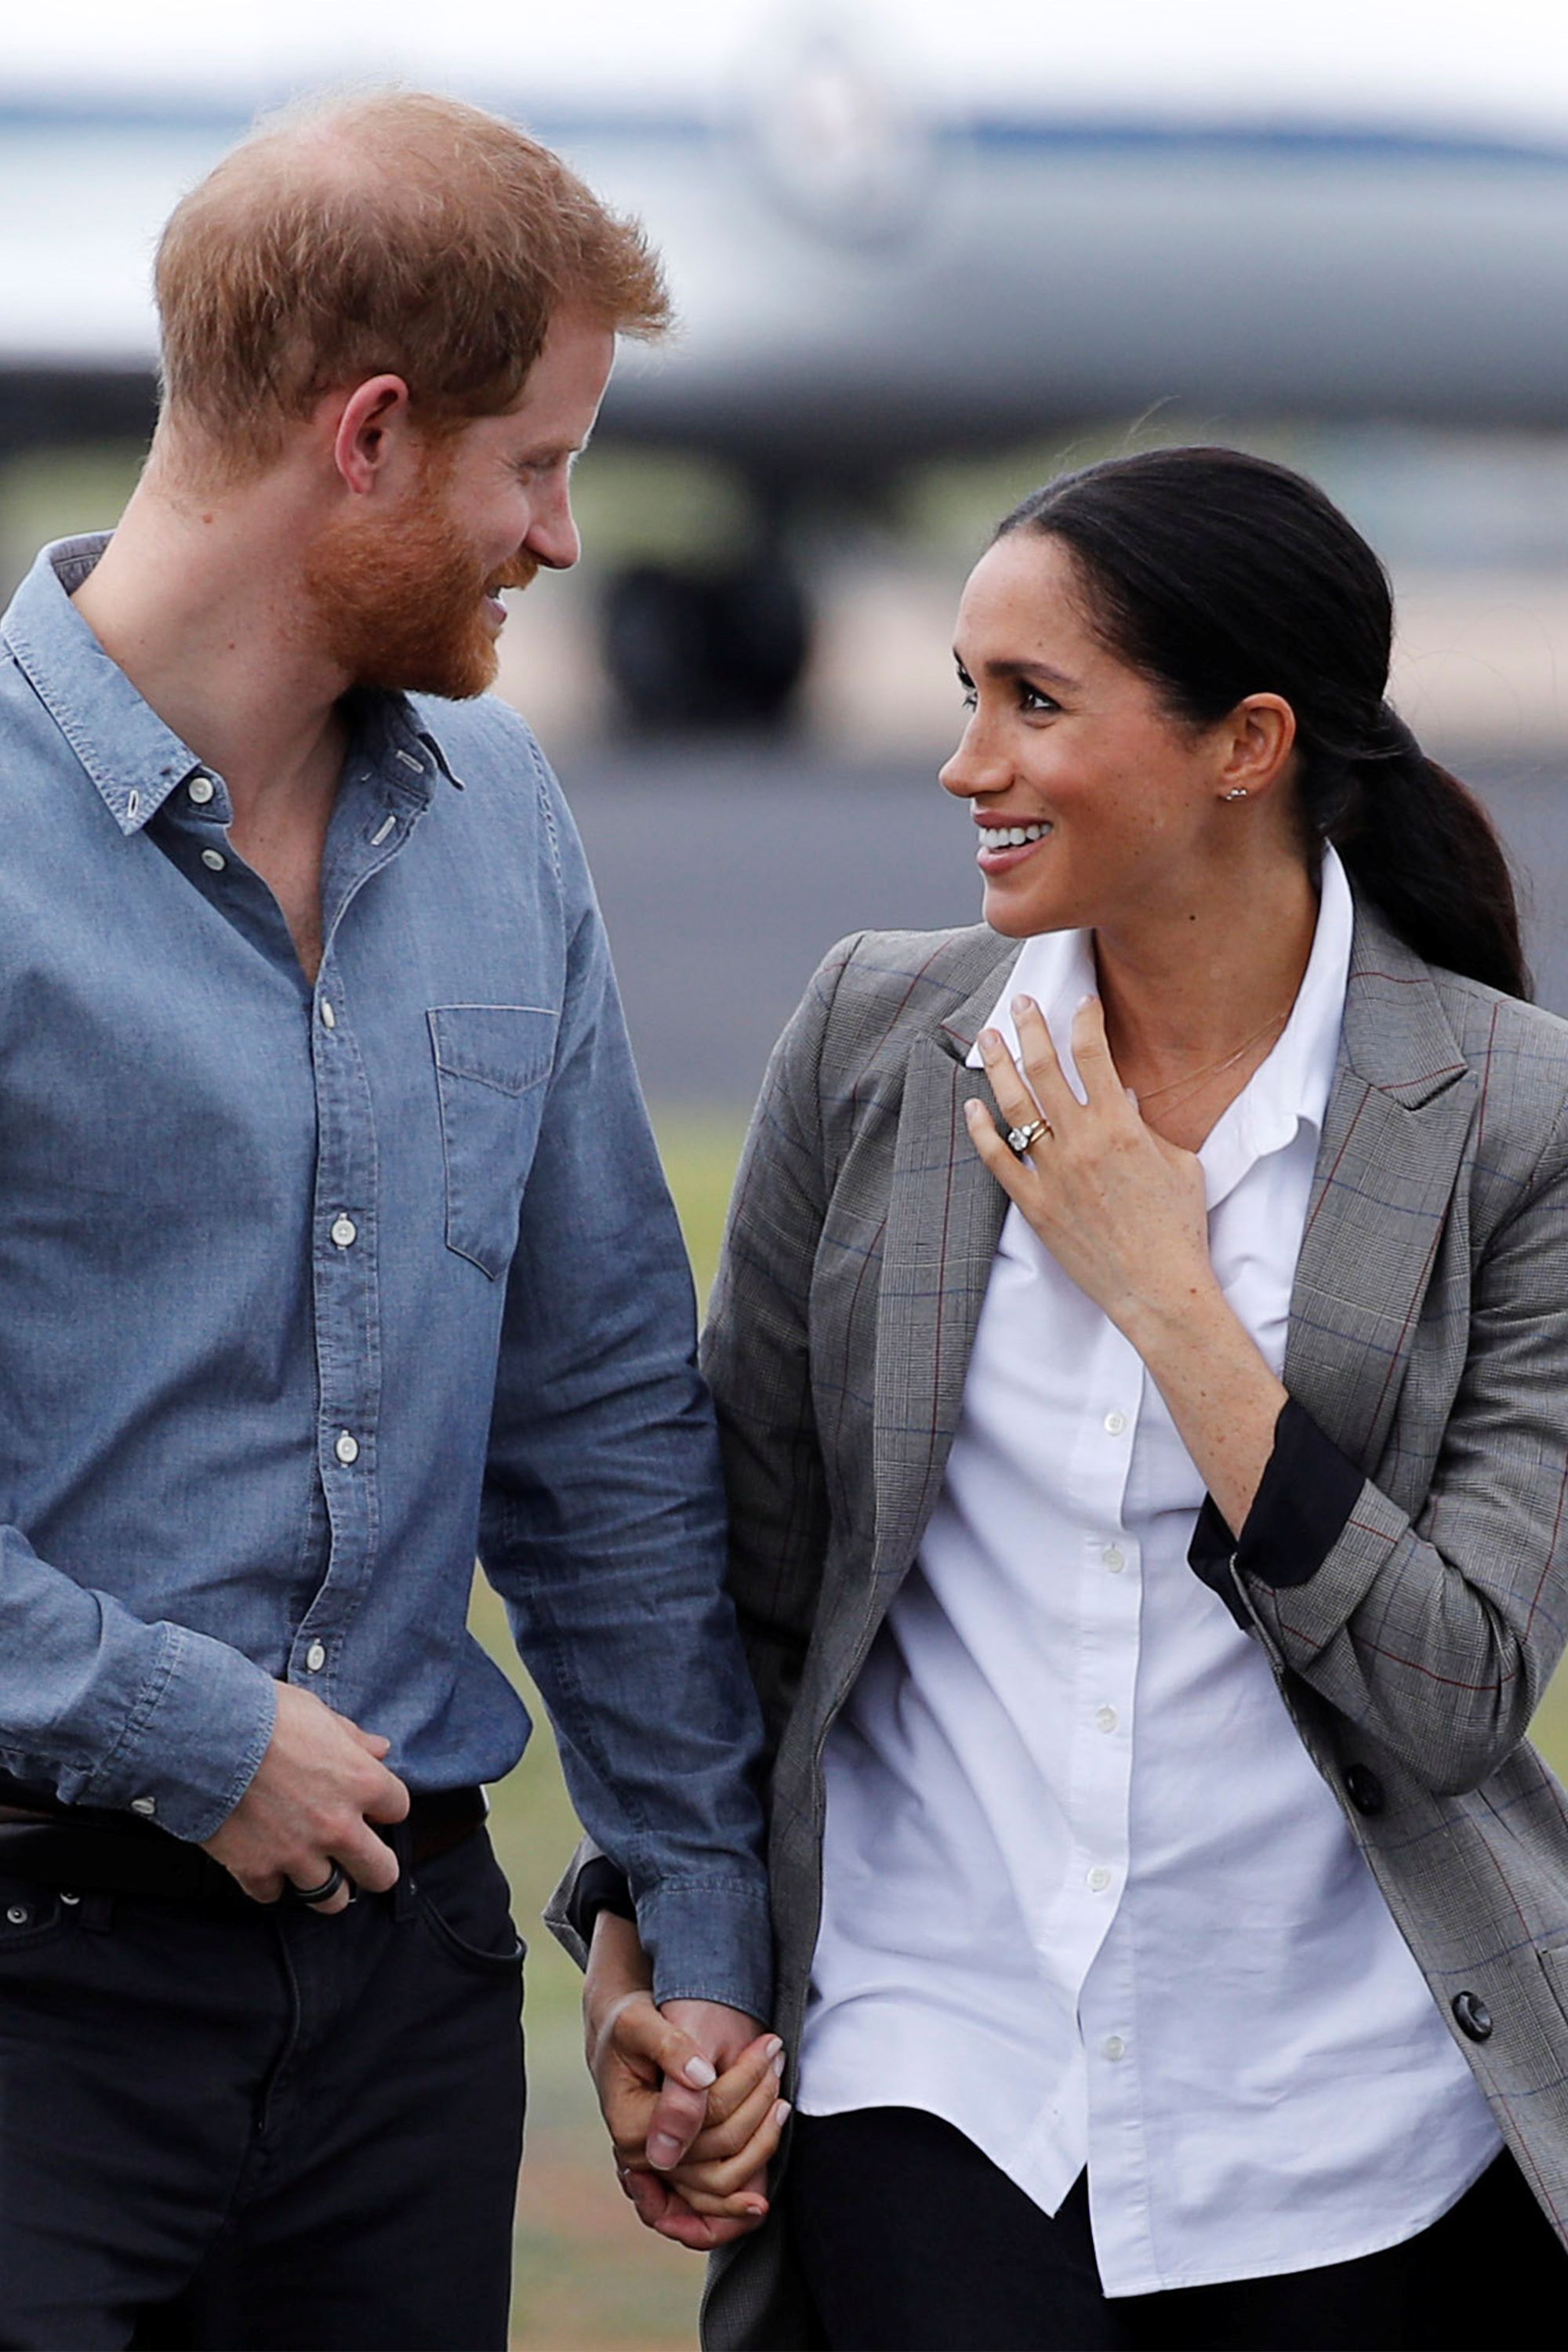 https://hips.hearstapps.com/hmg-prod.s3.amazonaws.com/images/hbz-prince-harry-meghan-markle-cute-moments-2018-10-gettyimages-1052312708.jpg?crop=1xw:1xh;center,top